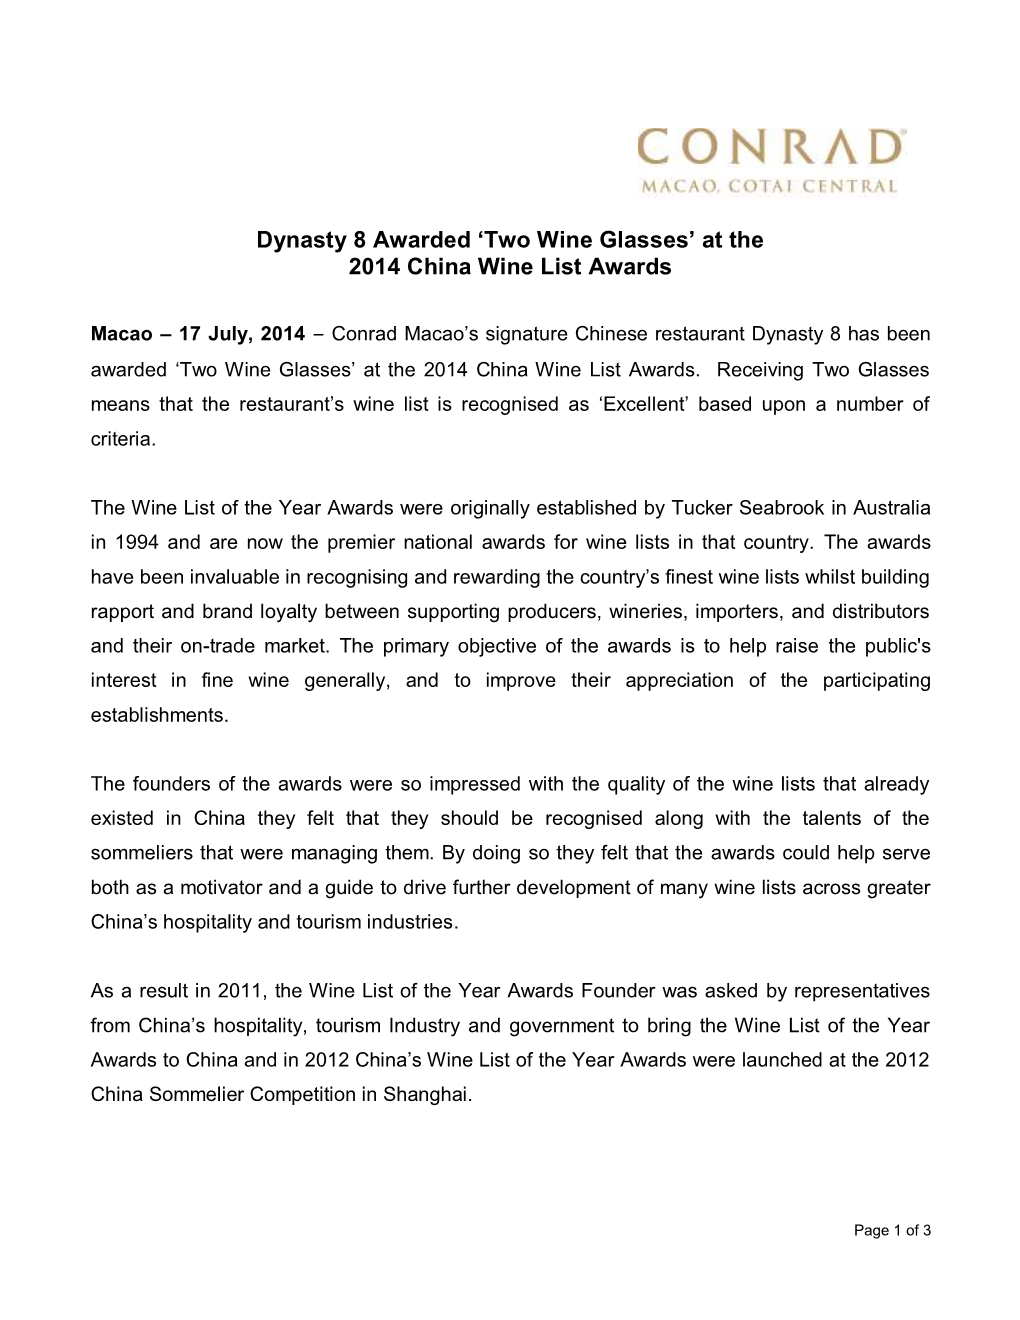 'Two Wine Glasses' at the 2014 China Wine List Awards